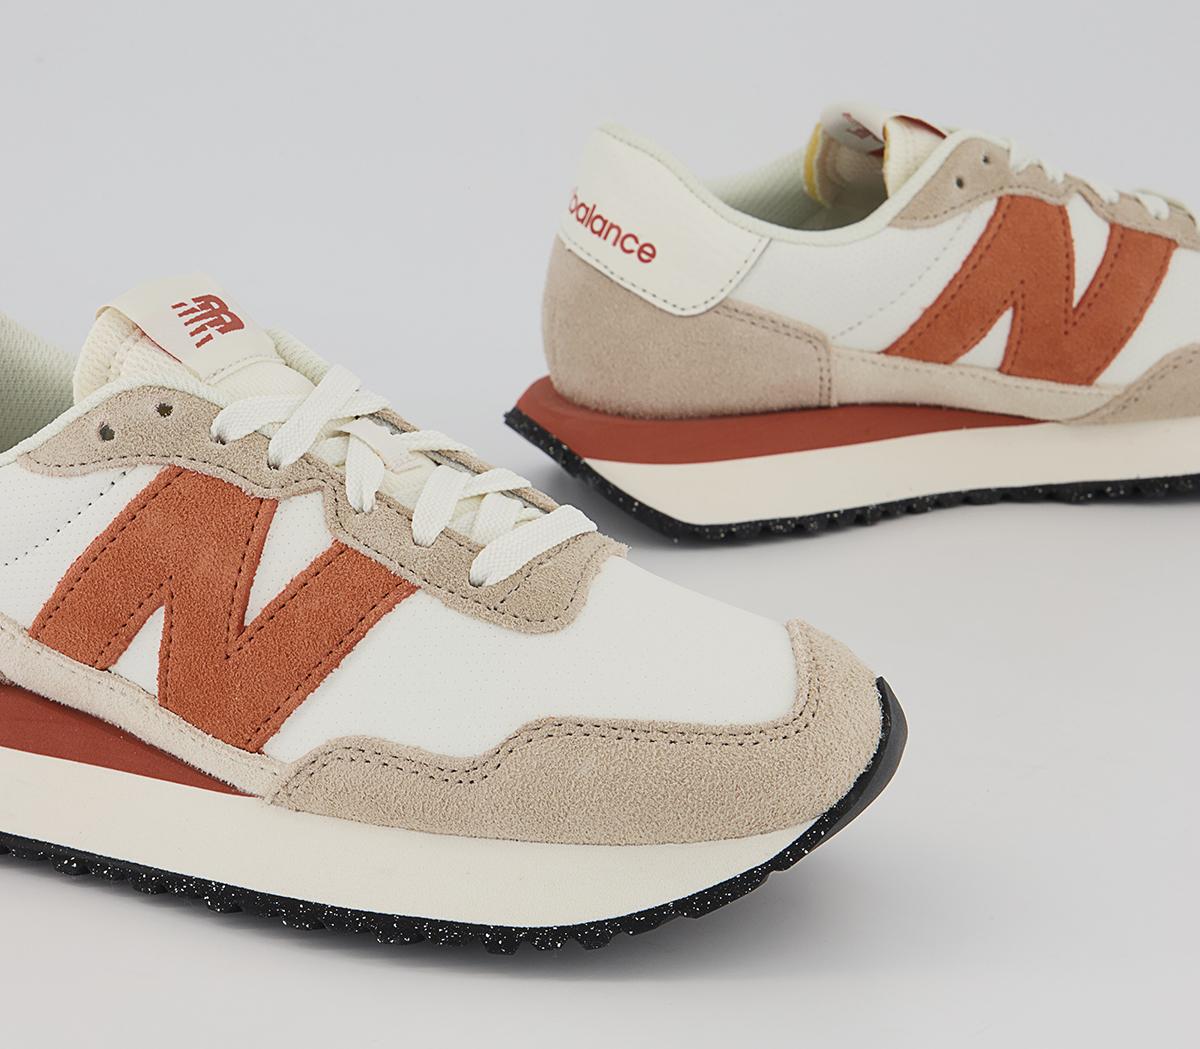 New Balance Ms237 Trainers Taupe Tan White Black - Unisex Sports